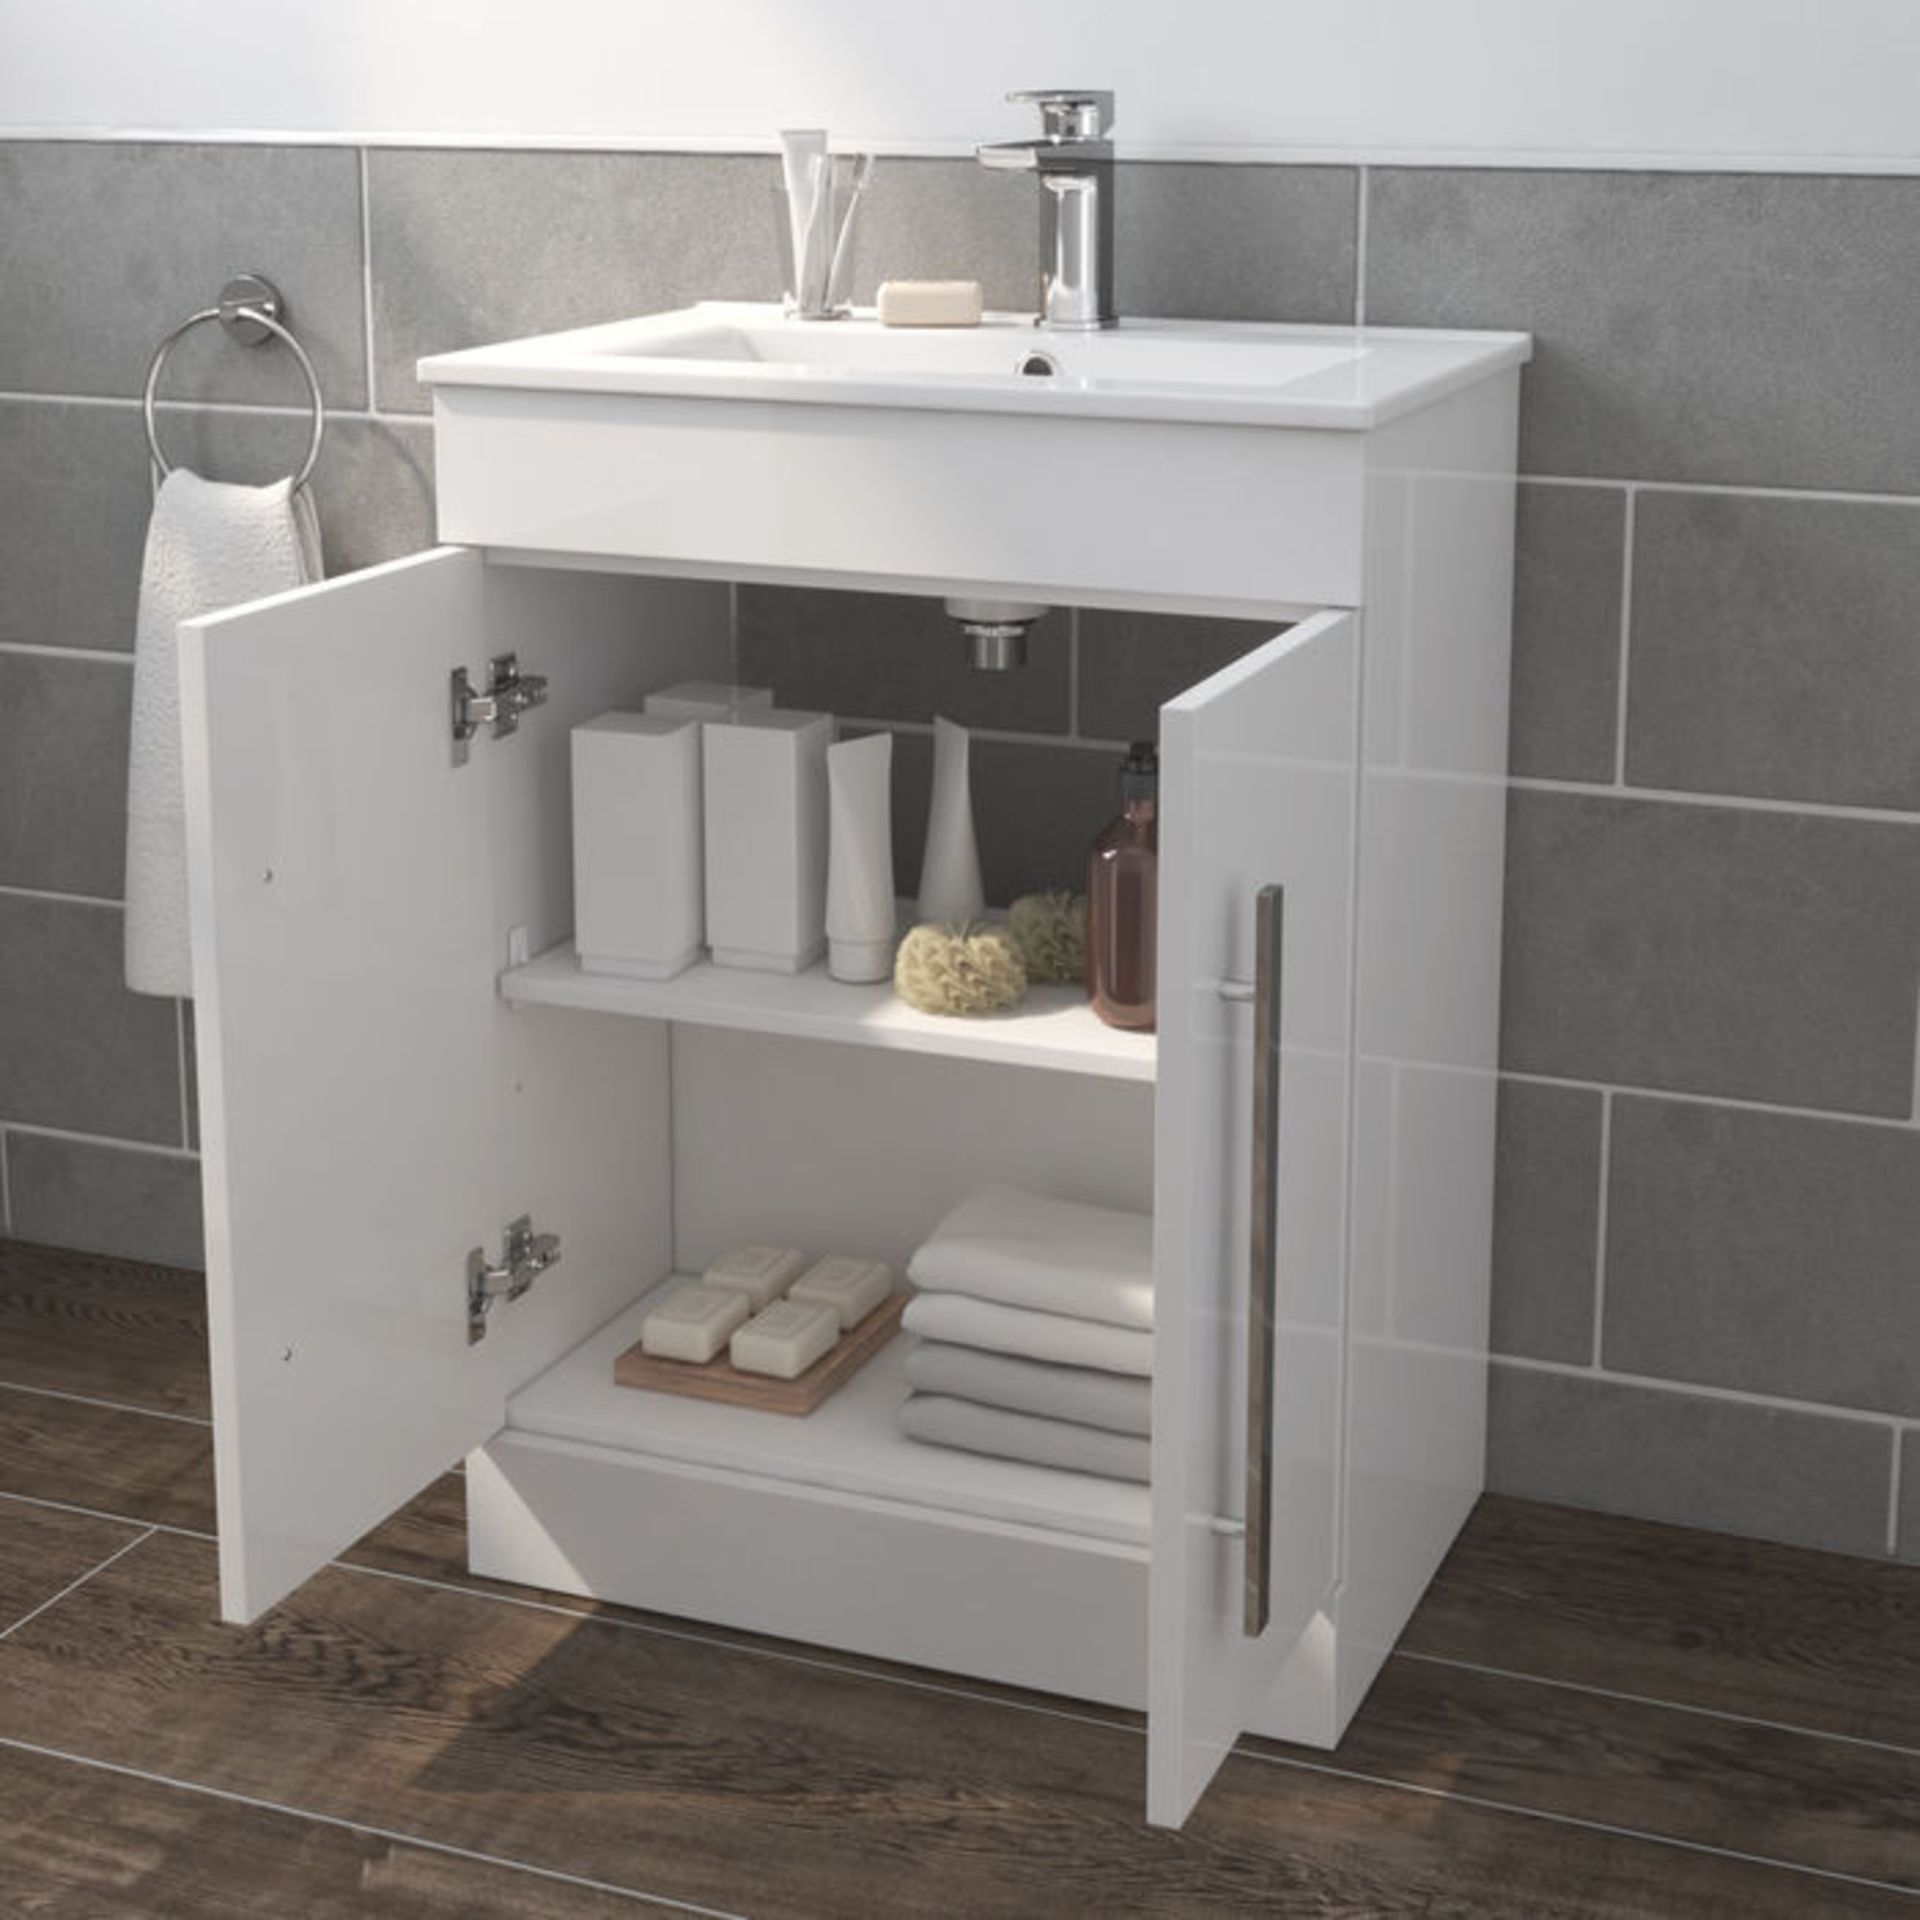 (PT17) 600mm Avon High Gloss White Basin Cabinet - Floor Standing. RRP £499.99. Comes complete - Image 2 of 5